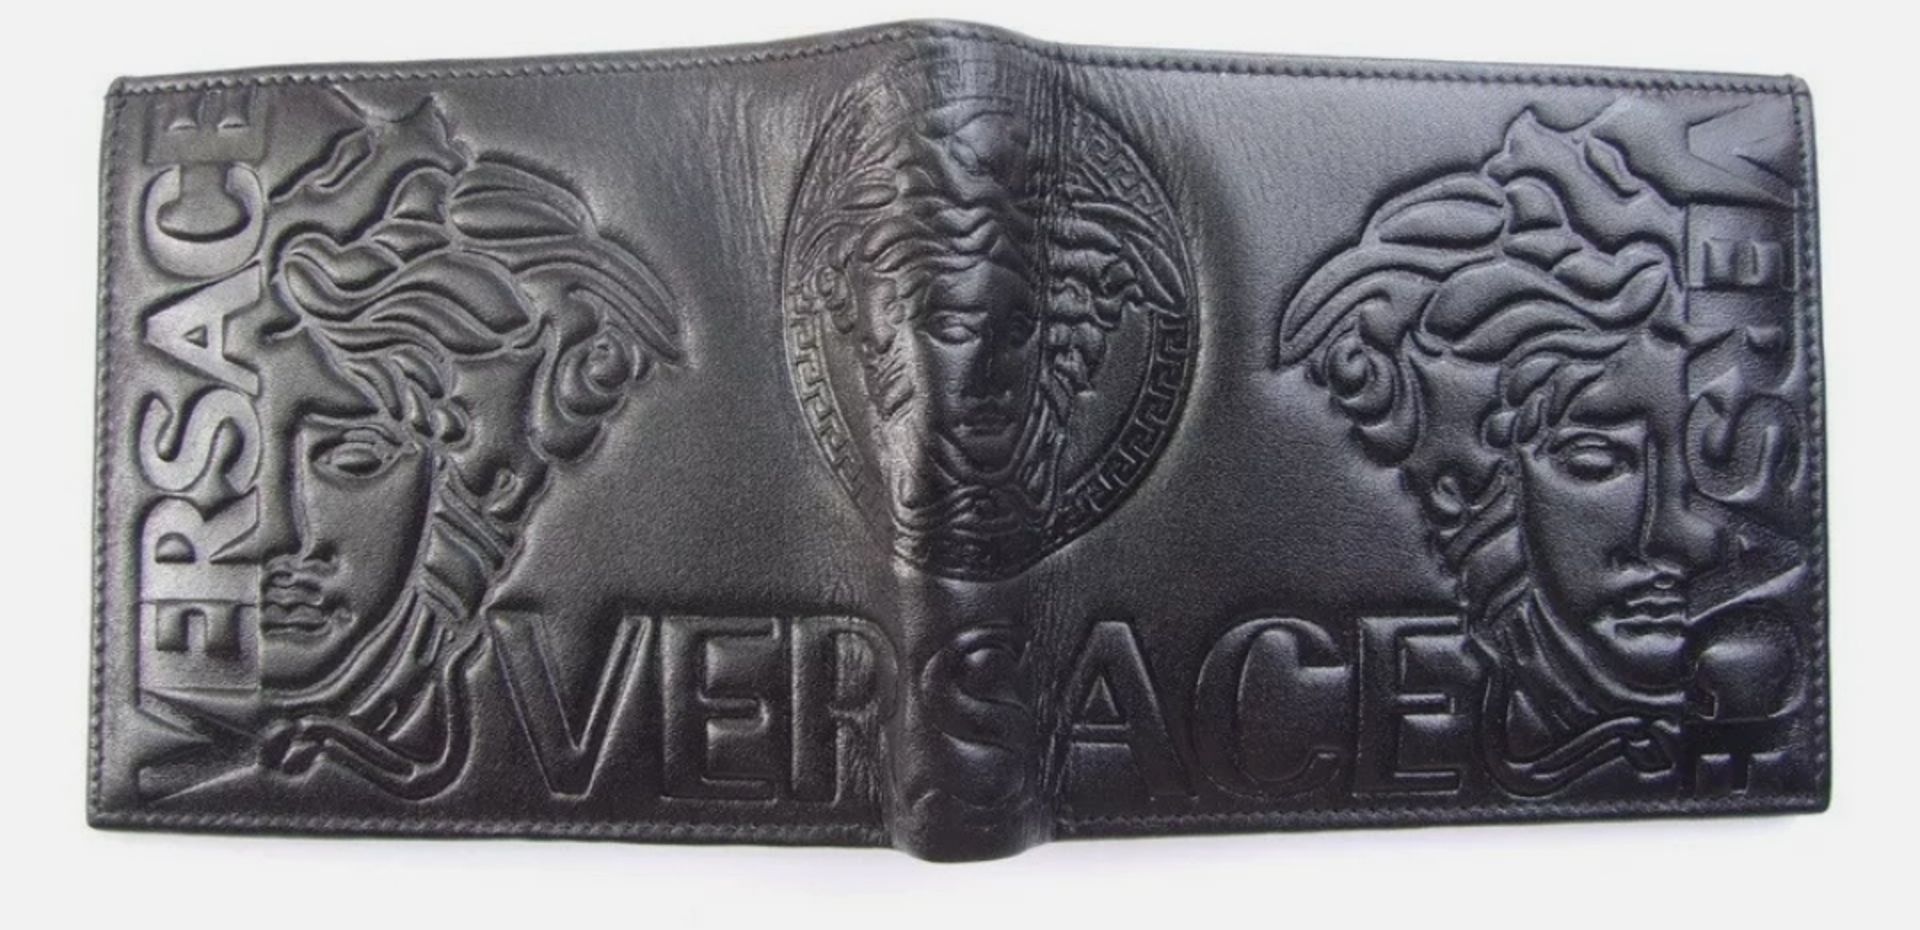 Versace Men's Leather Wallet - New With Box - Image 6 of 9